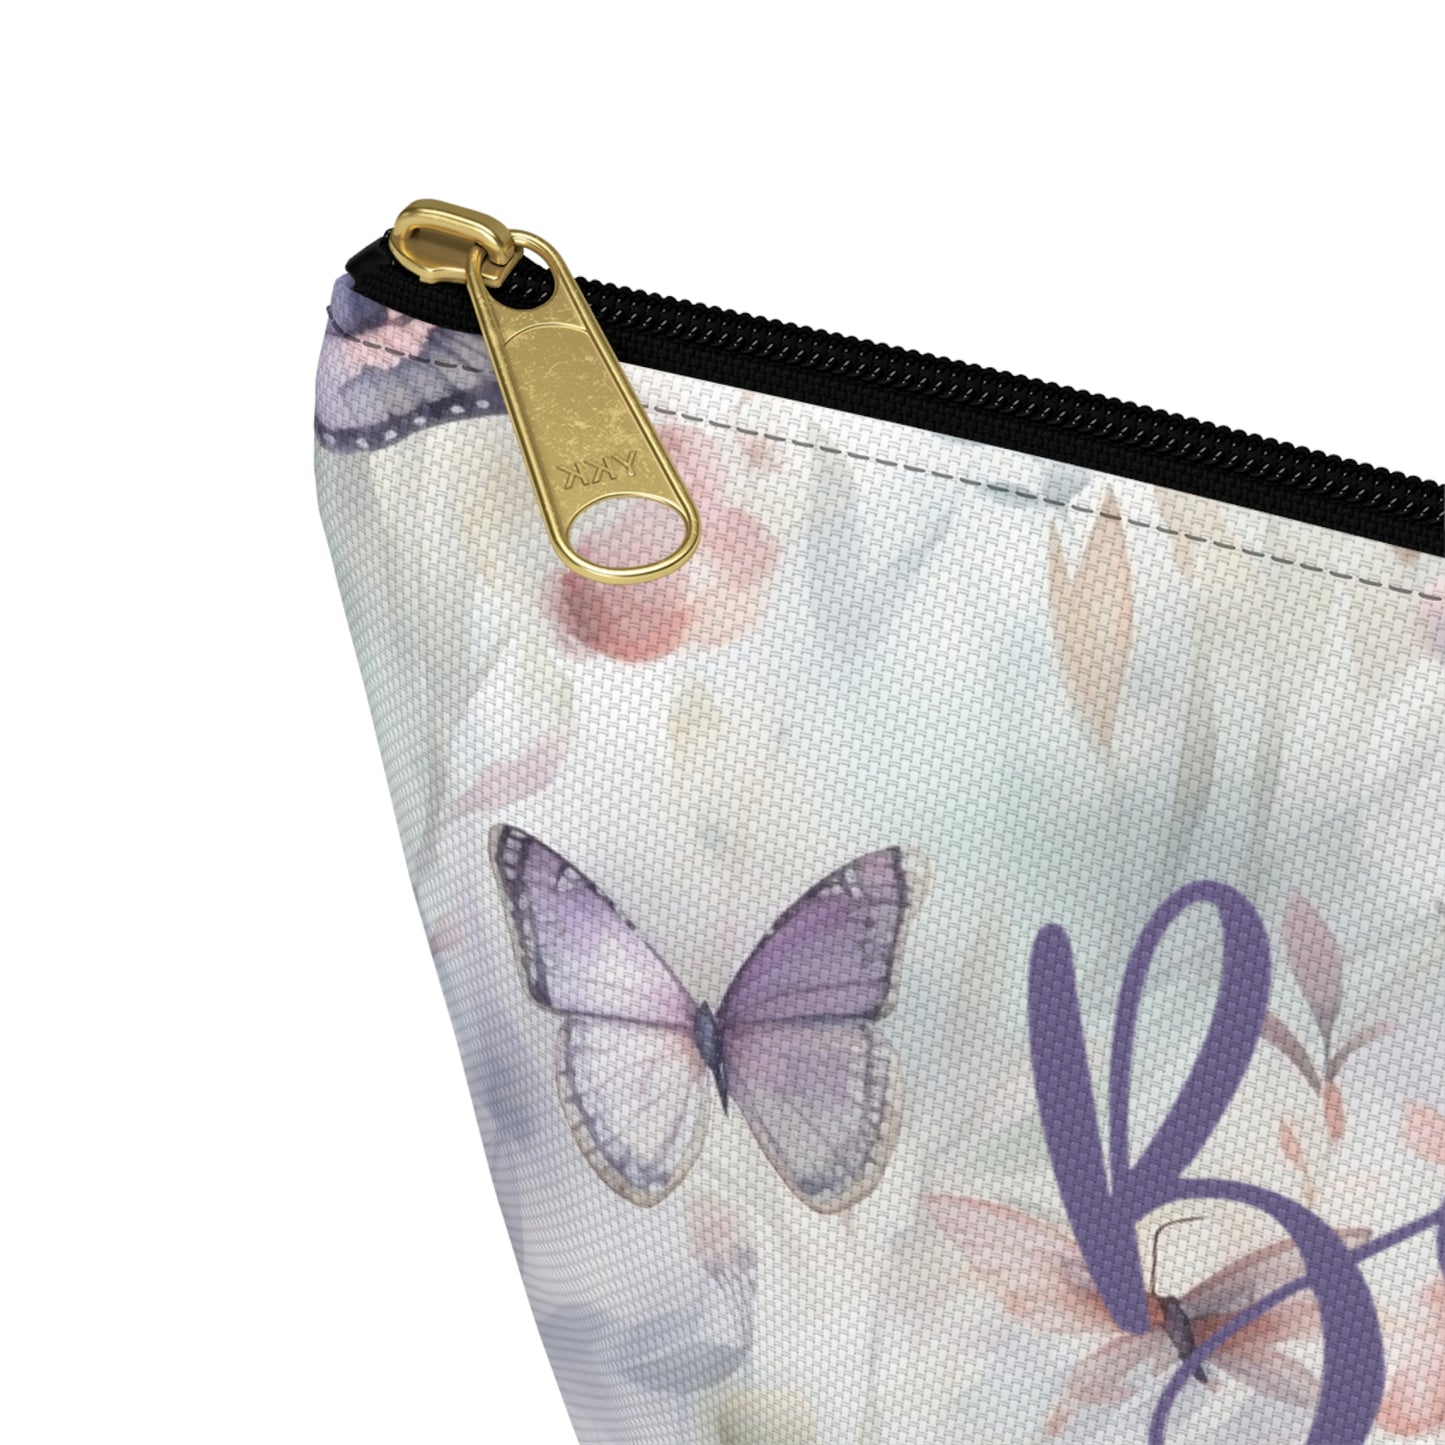 Butterfly Makeup Bag / Personalized Cosmetic Bag